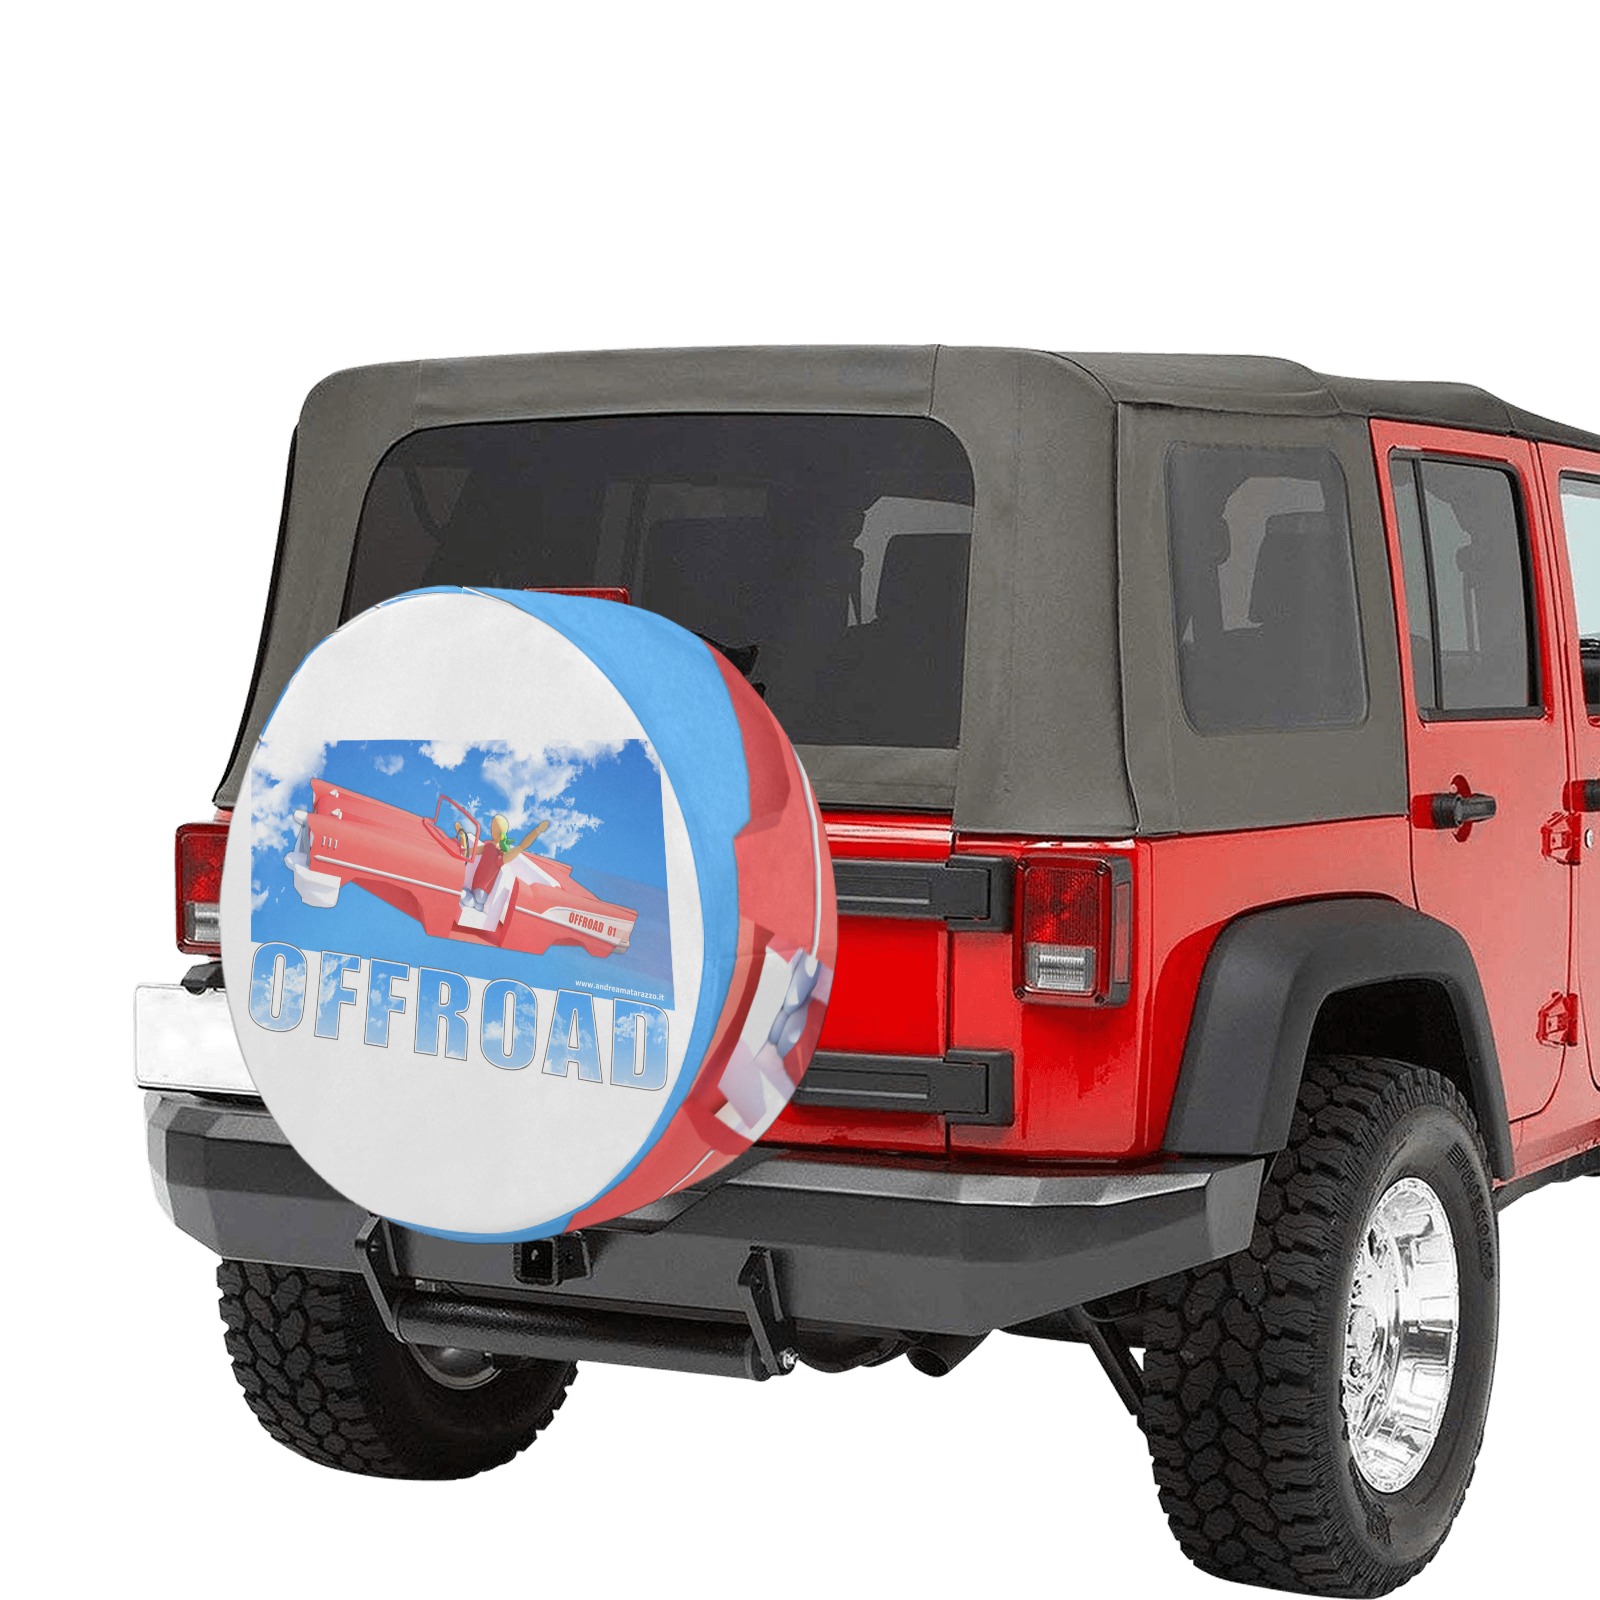 Offroad - 01 34 Inch Spare Tire Cover